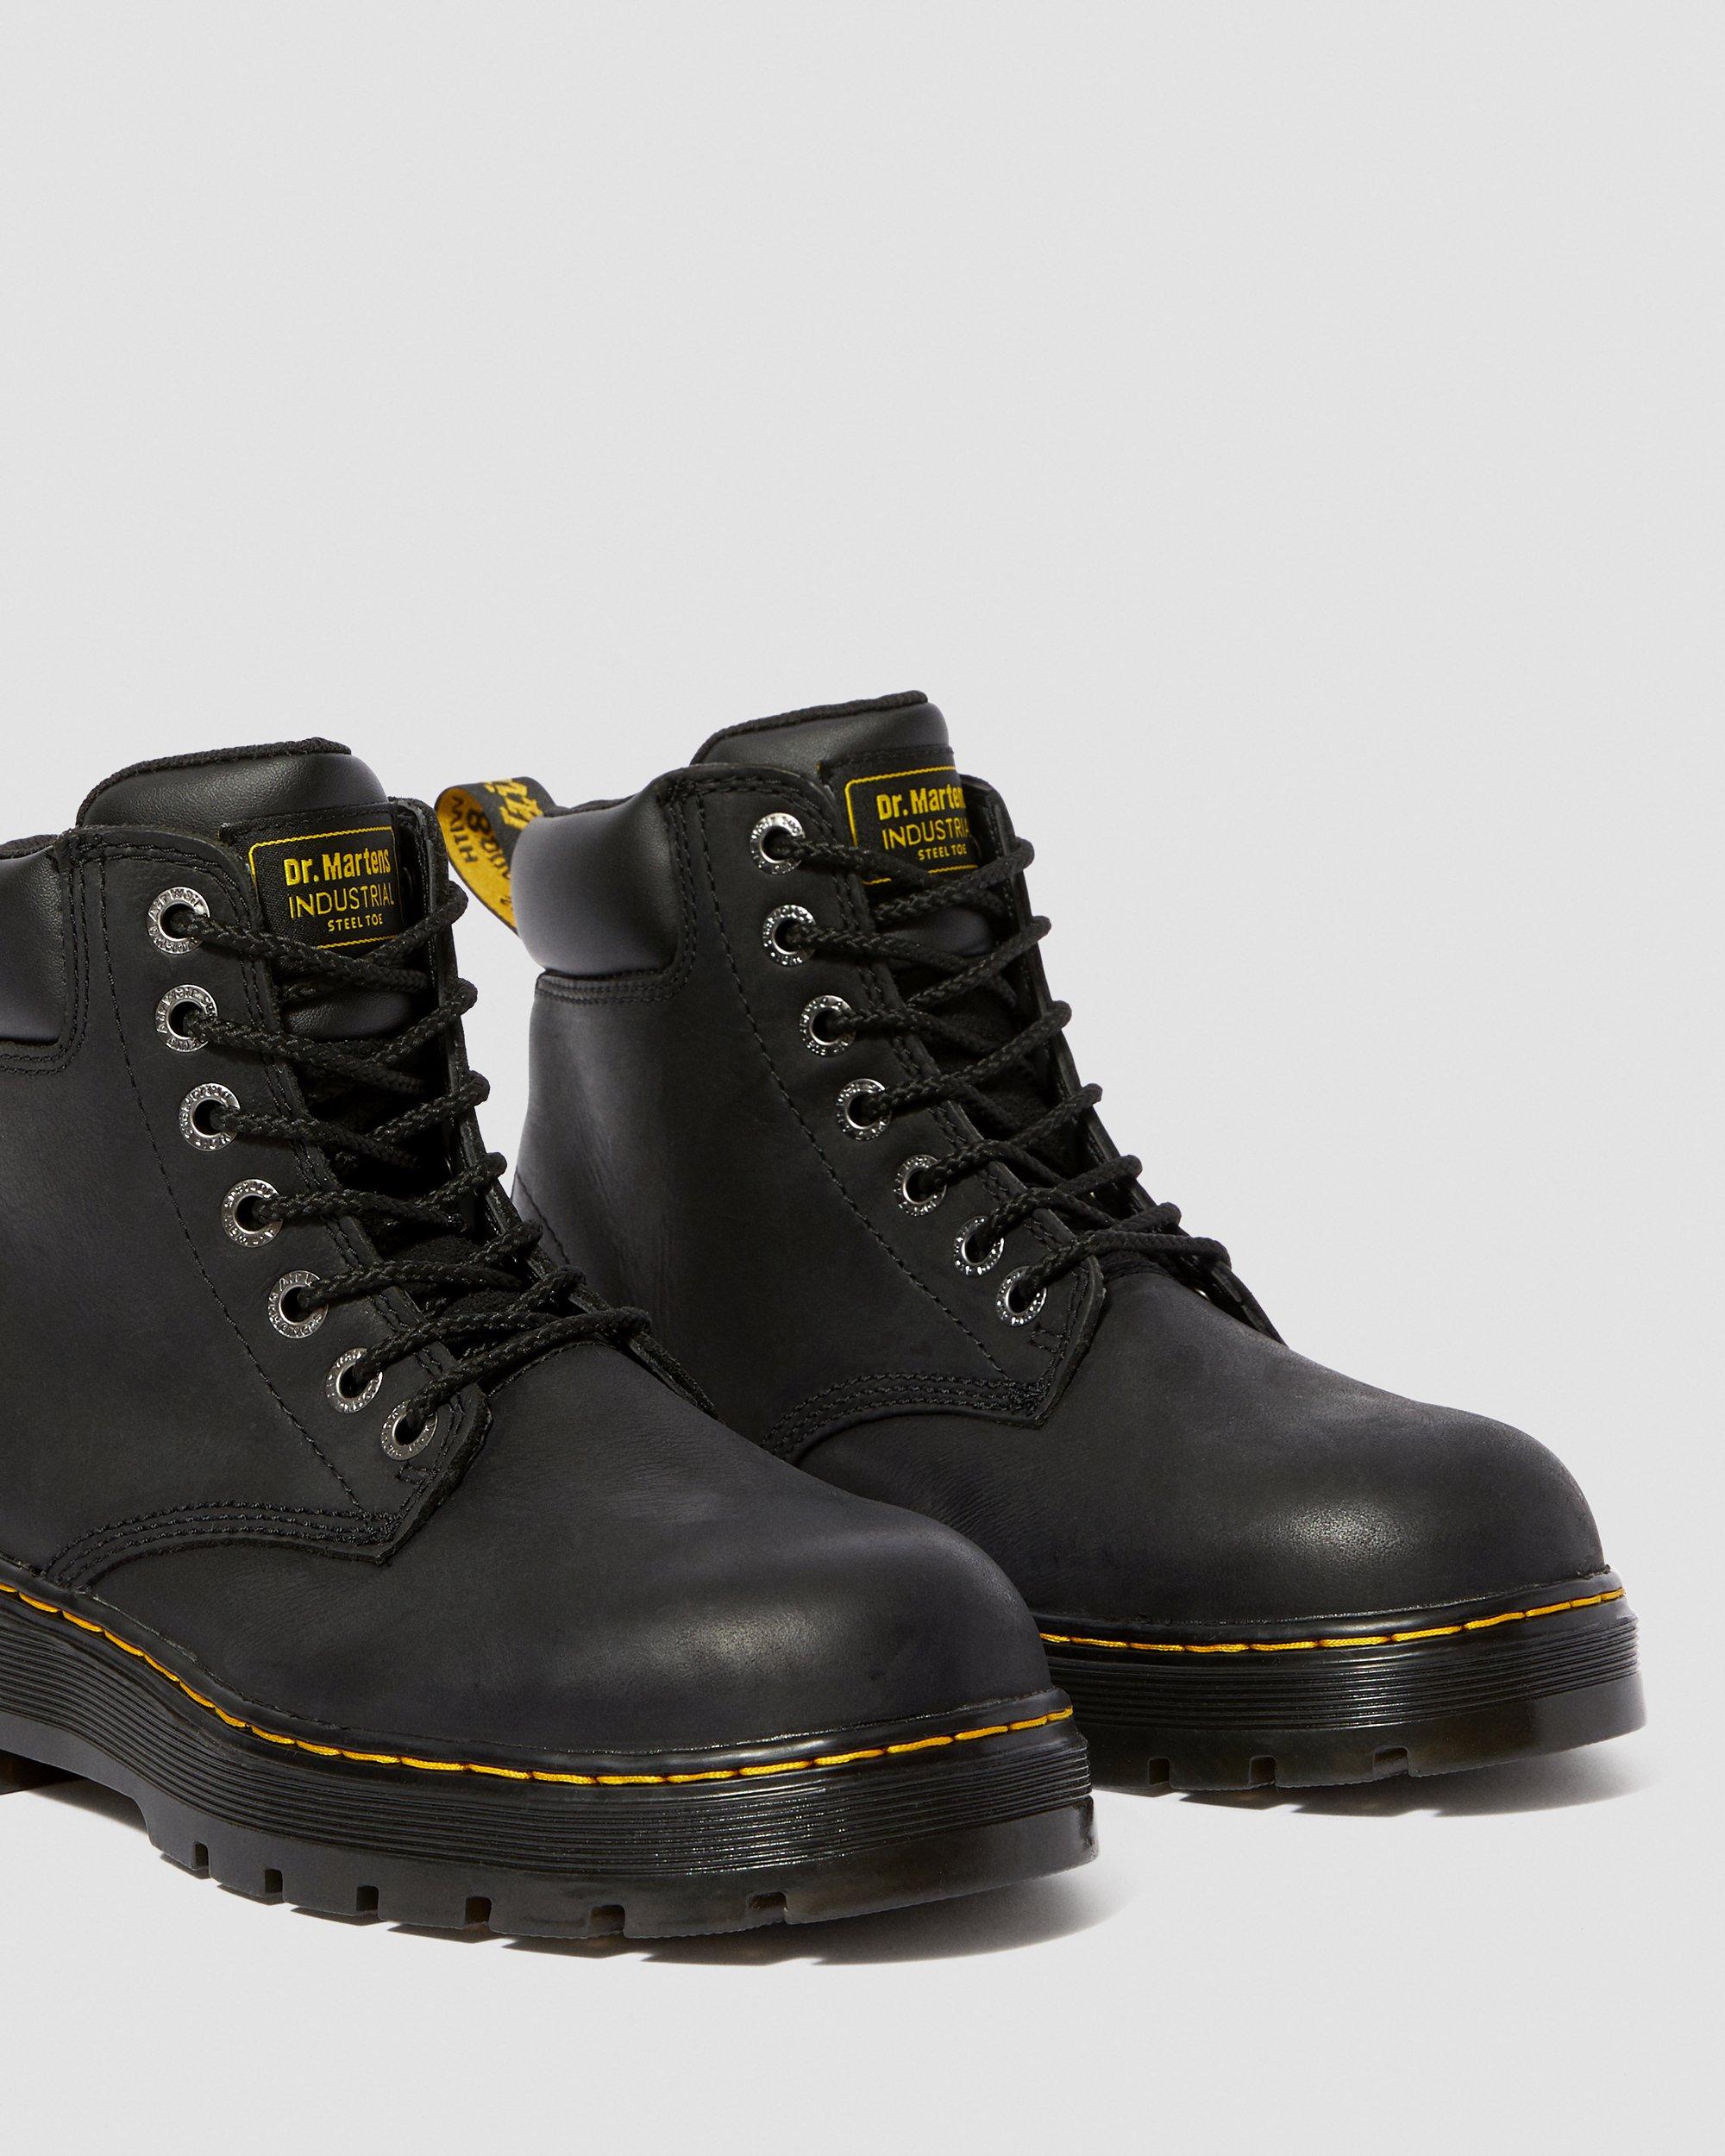 WINCH EXTRA WIDE WORK BOOTS | Dr. Martens